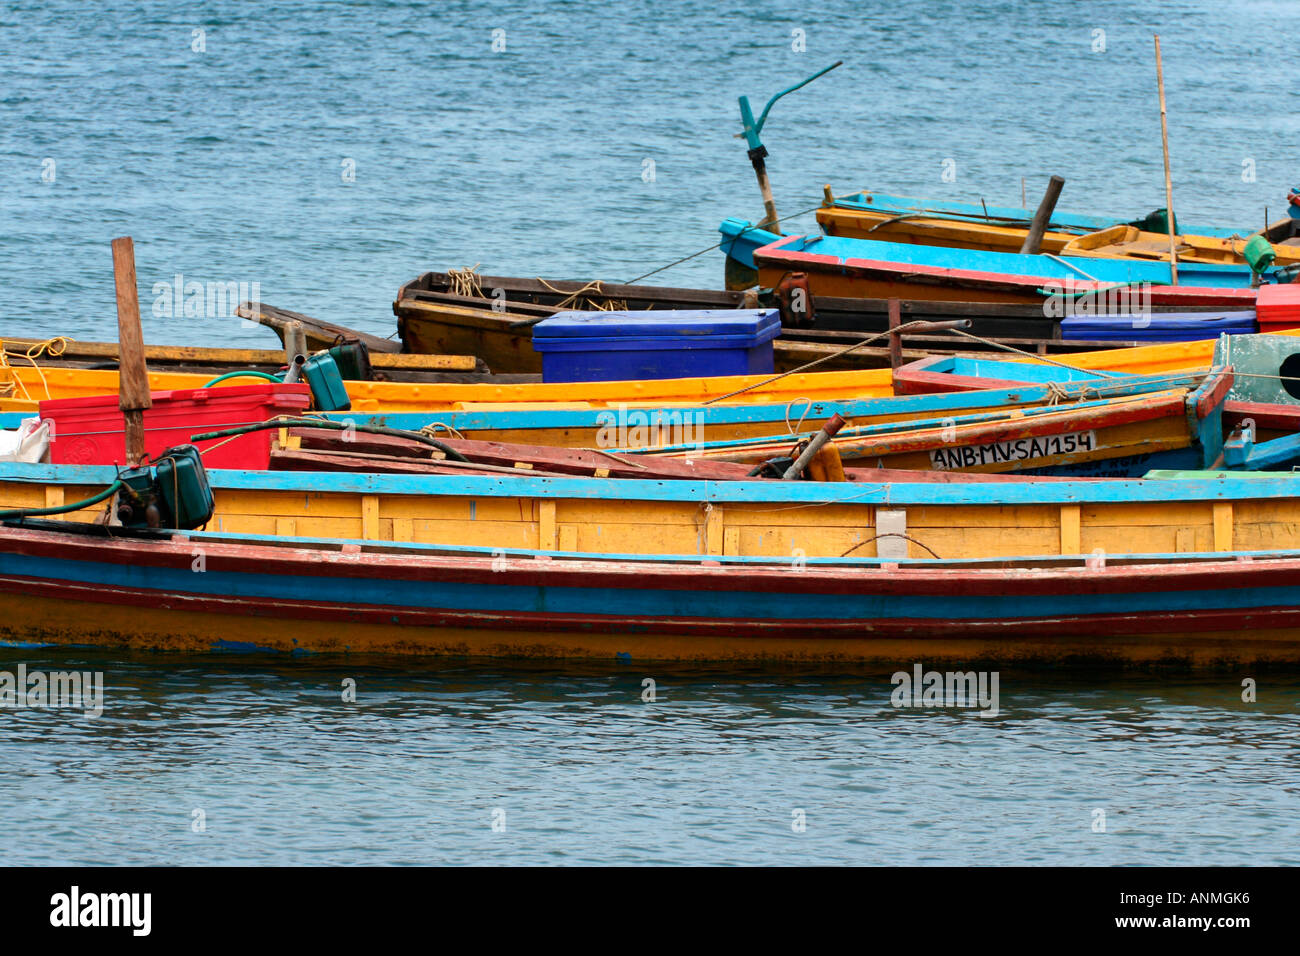 Fishing boats anchored in the blue waters at Jolly buoy Andaman Stock Photo